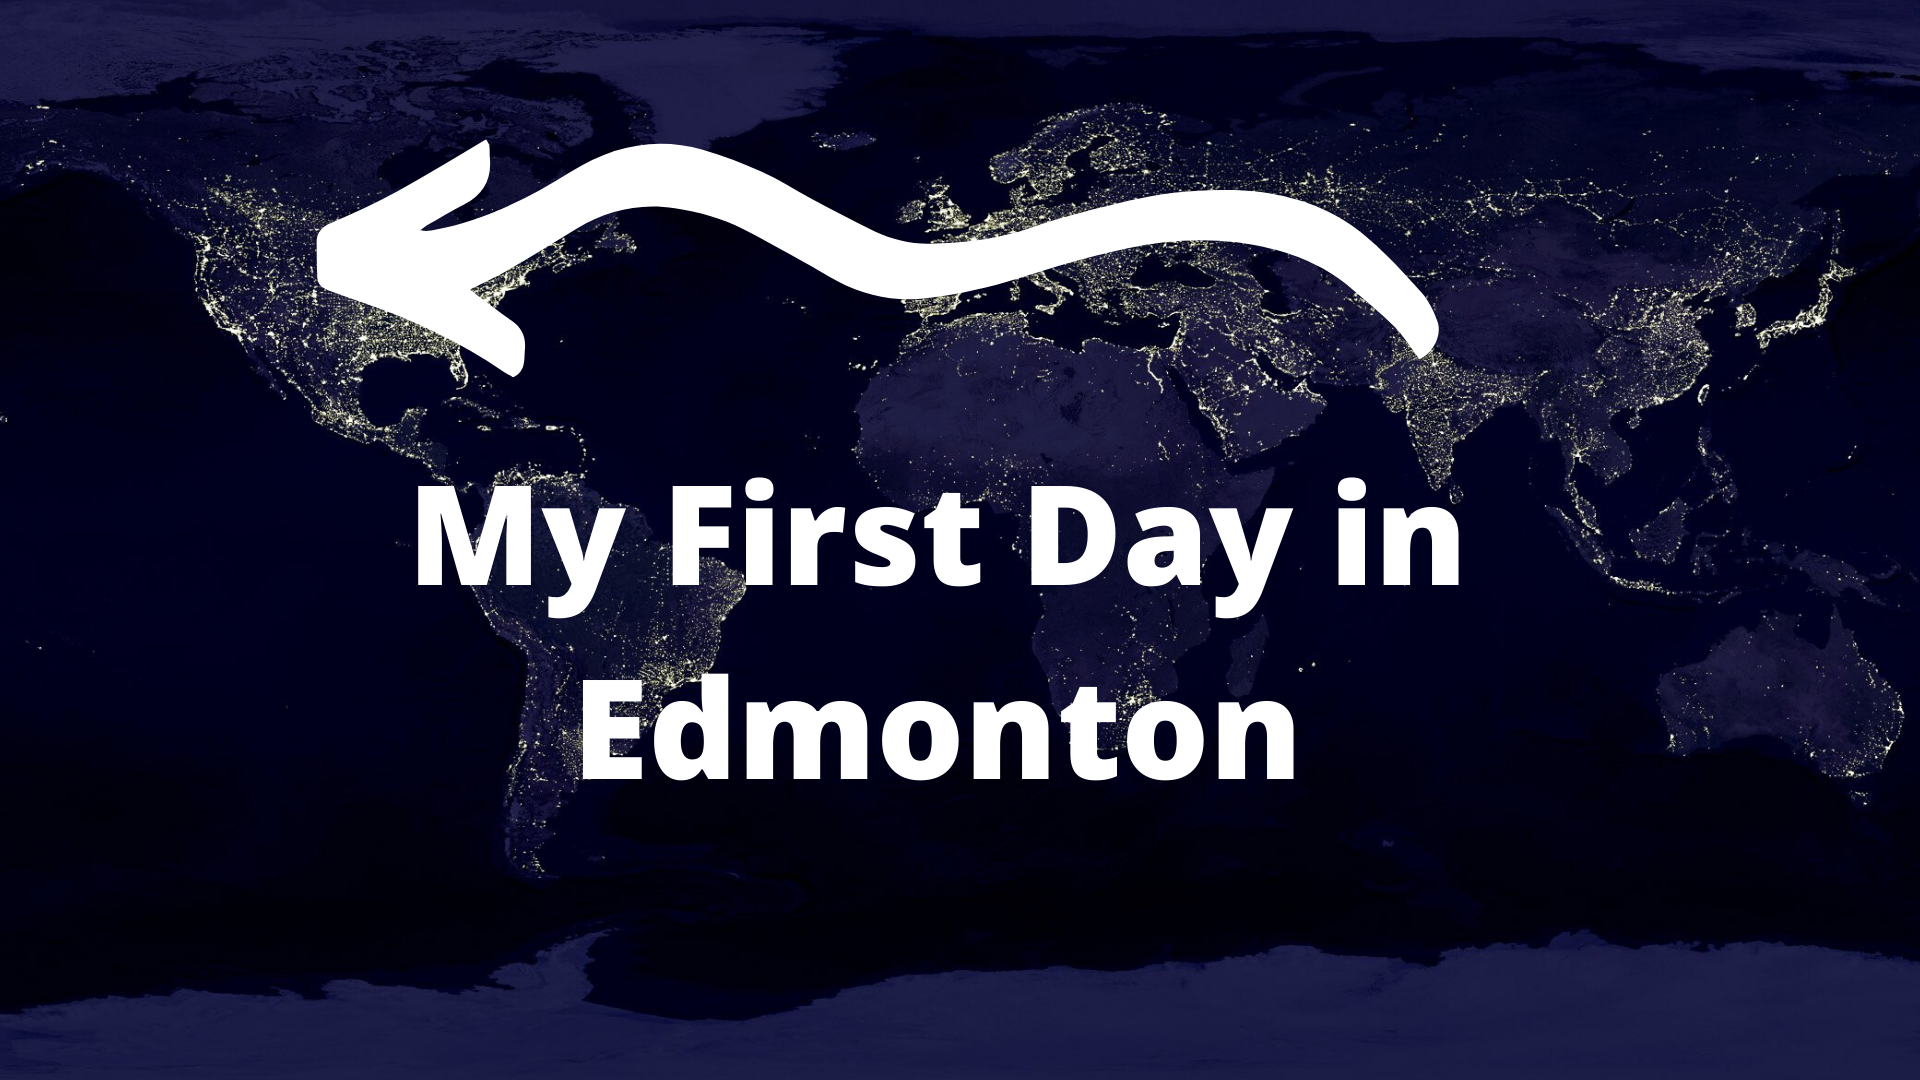 my-first-day-in-edmonton-11rk76-coms8tmjz1jo6rza.png